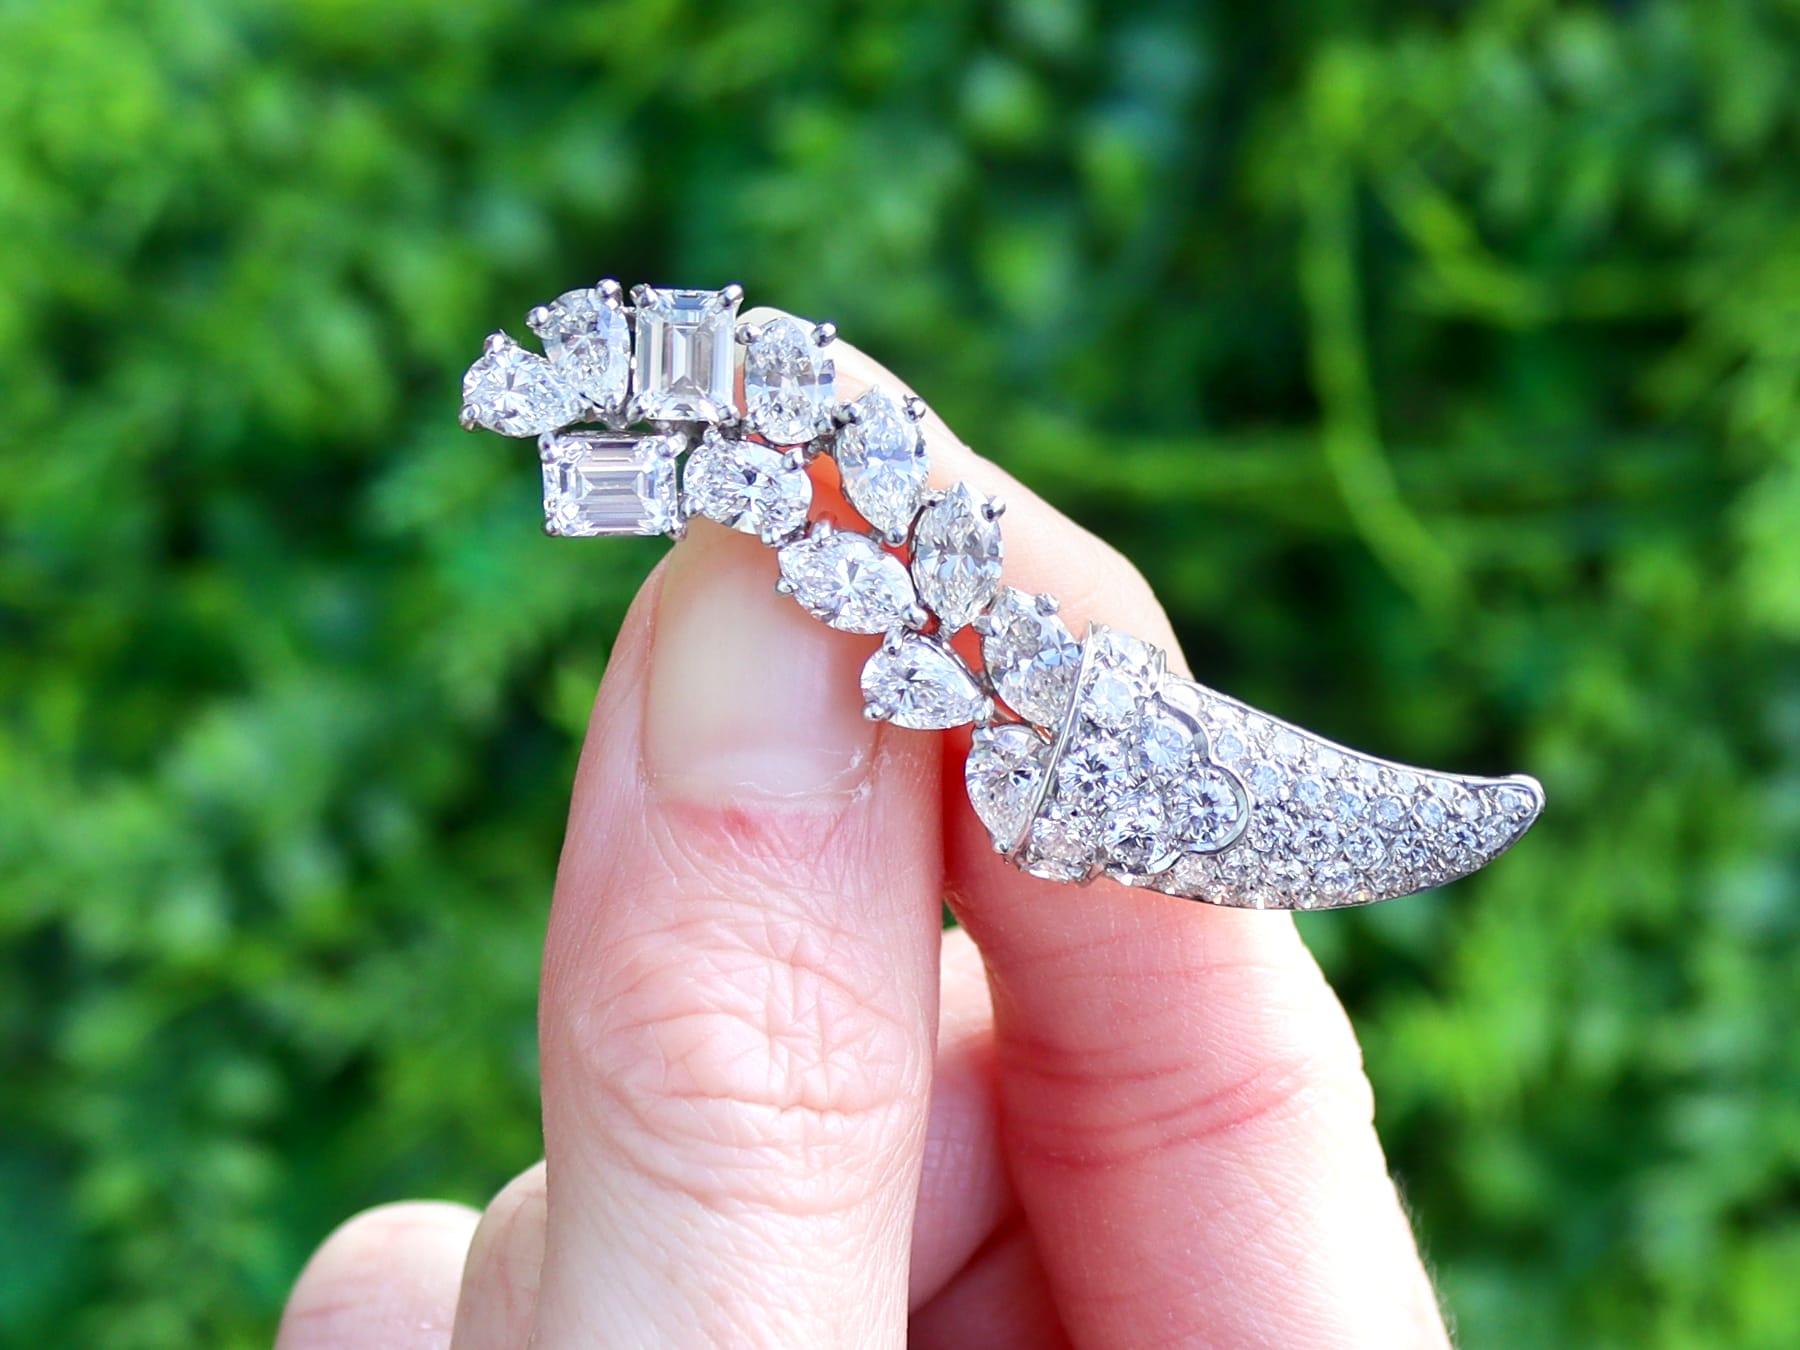 A stunning, fine and impressive vintage 1950s 6.87 carat diamond and platinum cornucopia brooch; part of our diverse diamond brooches collection.

This stunning, fine and impressive vintage diamond brooch has been crafted in 18k white gold and